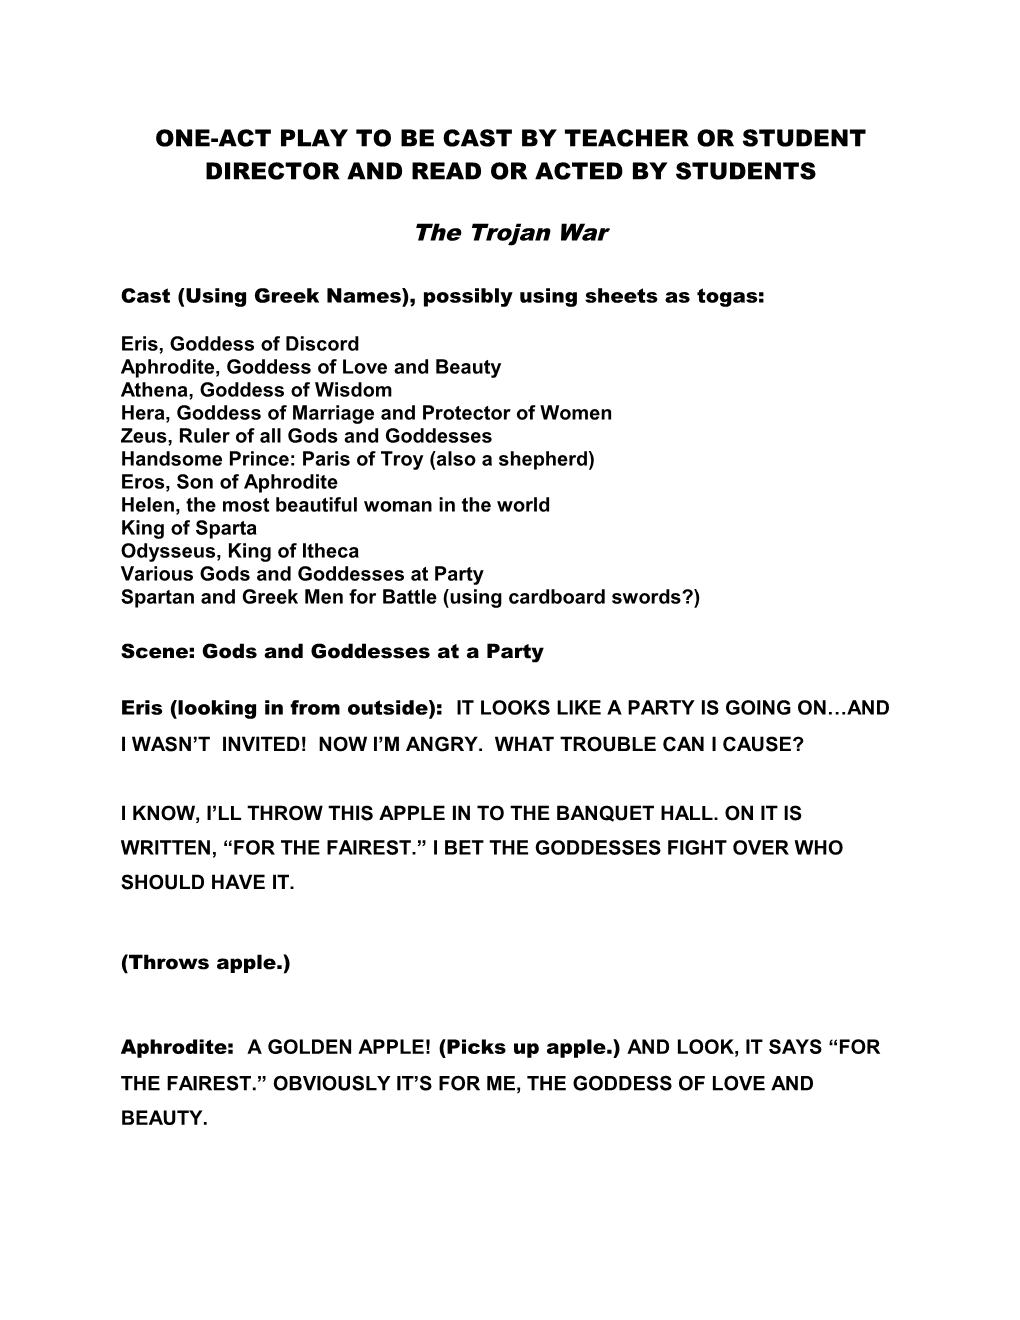 One-Act Play to Be Cast by Teacher Or Student Director and Read Or Acted by Students